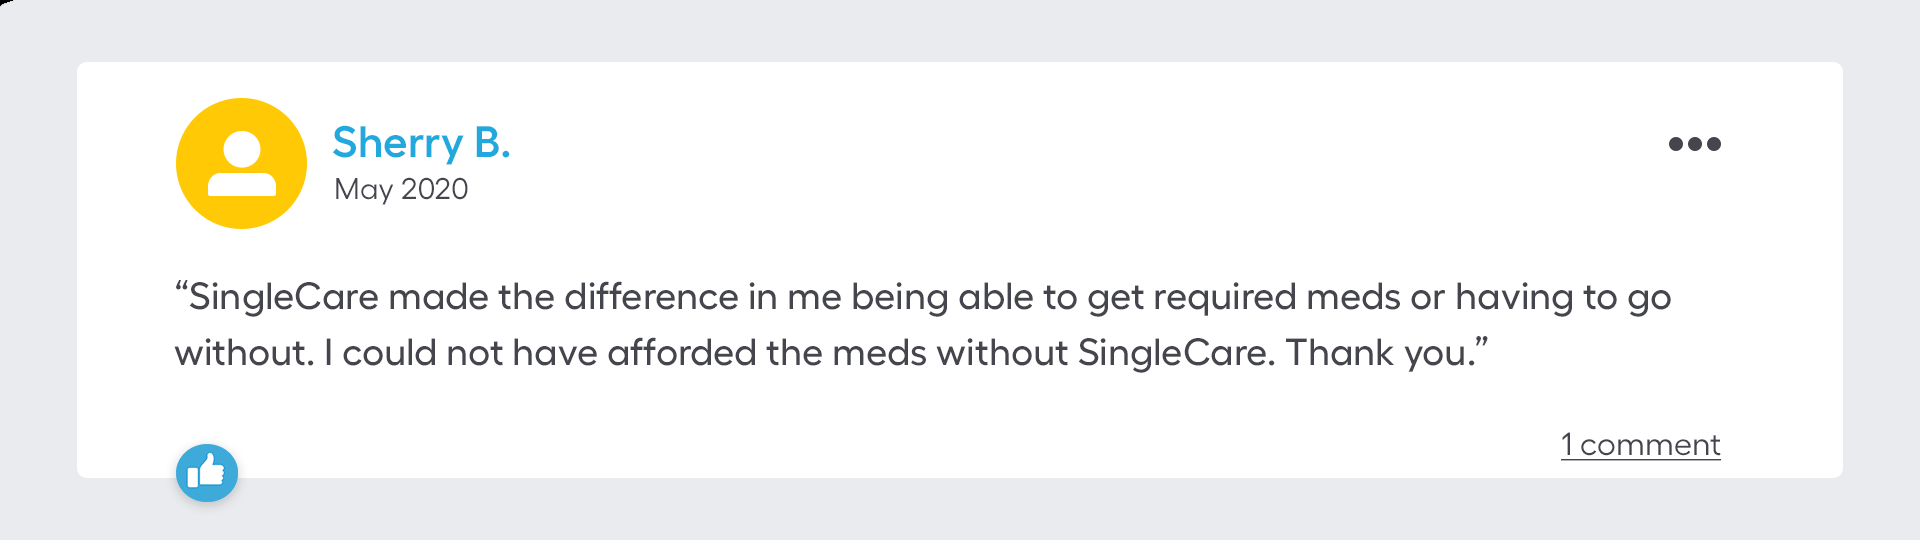 SingleCare made the difference in me being able to get required meds or having to go without. I could not have afforded the meds without SingleCare. Thank you.